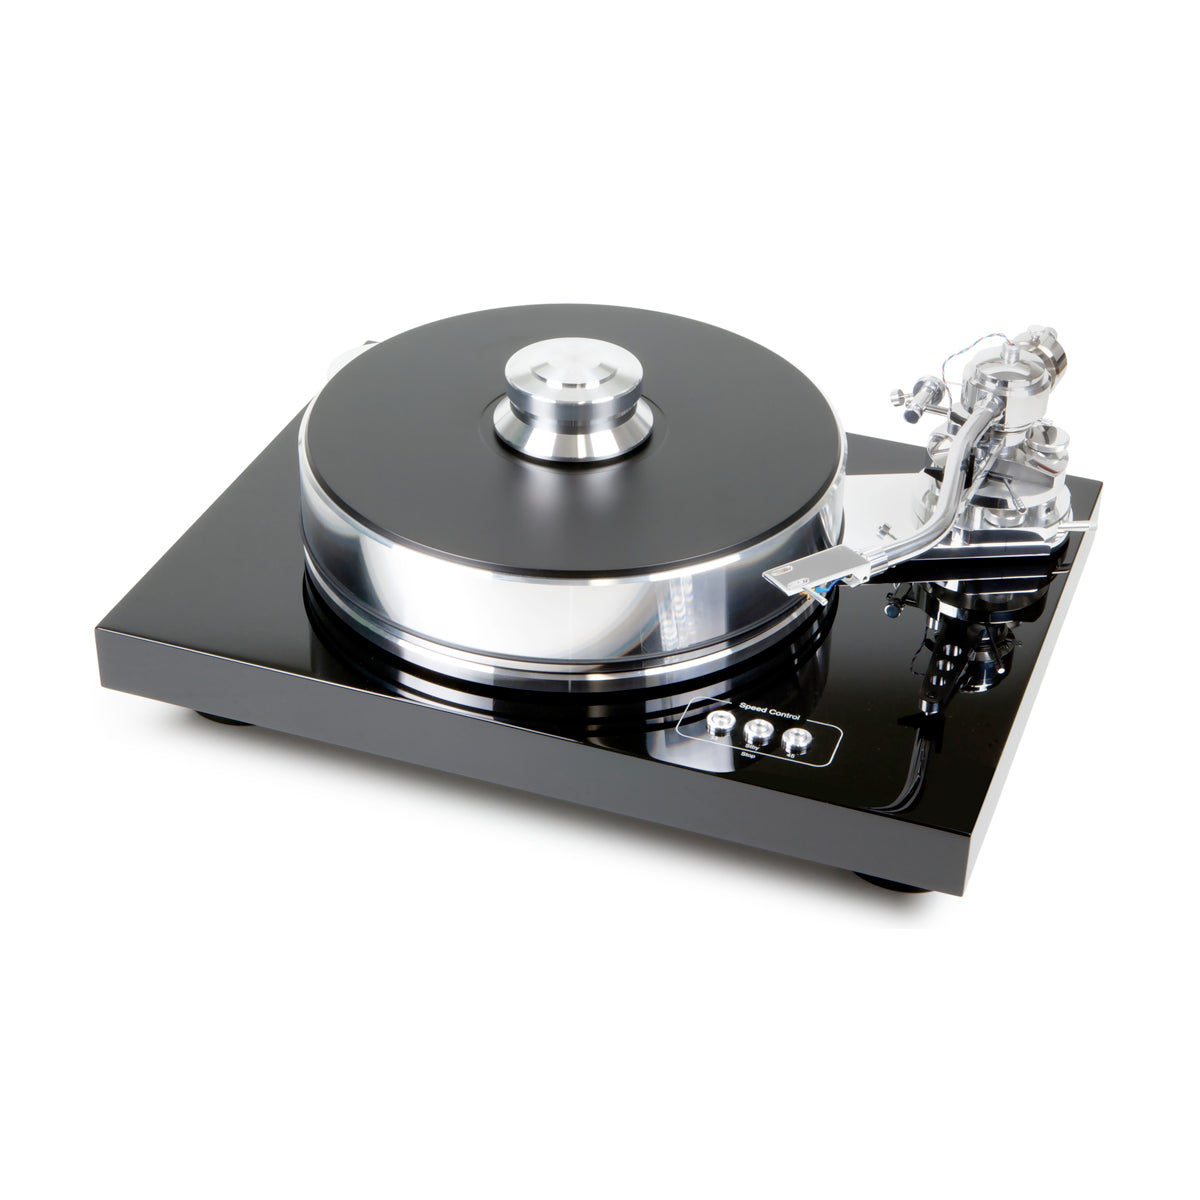 Pro-Ject Signature 10 turntable - The Audio Experts